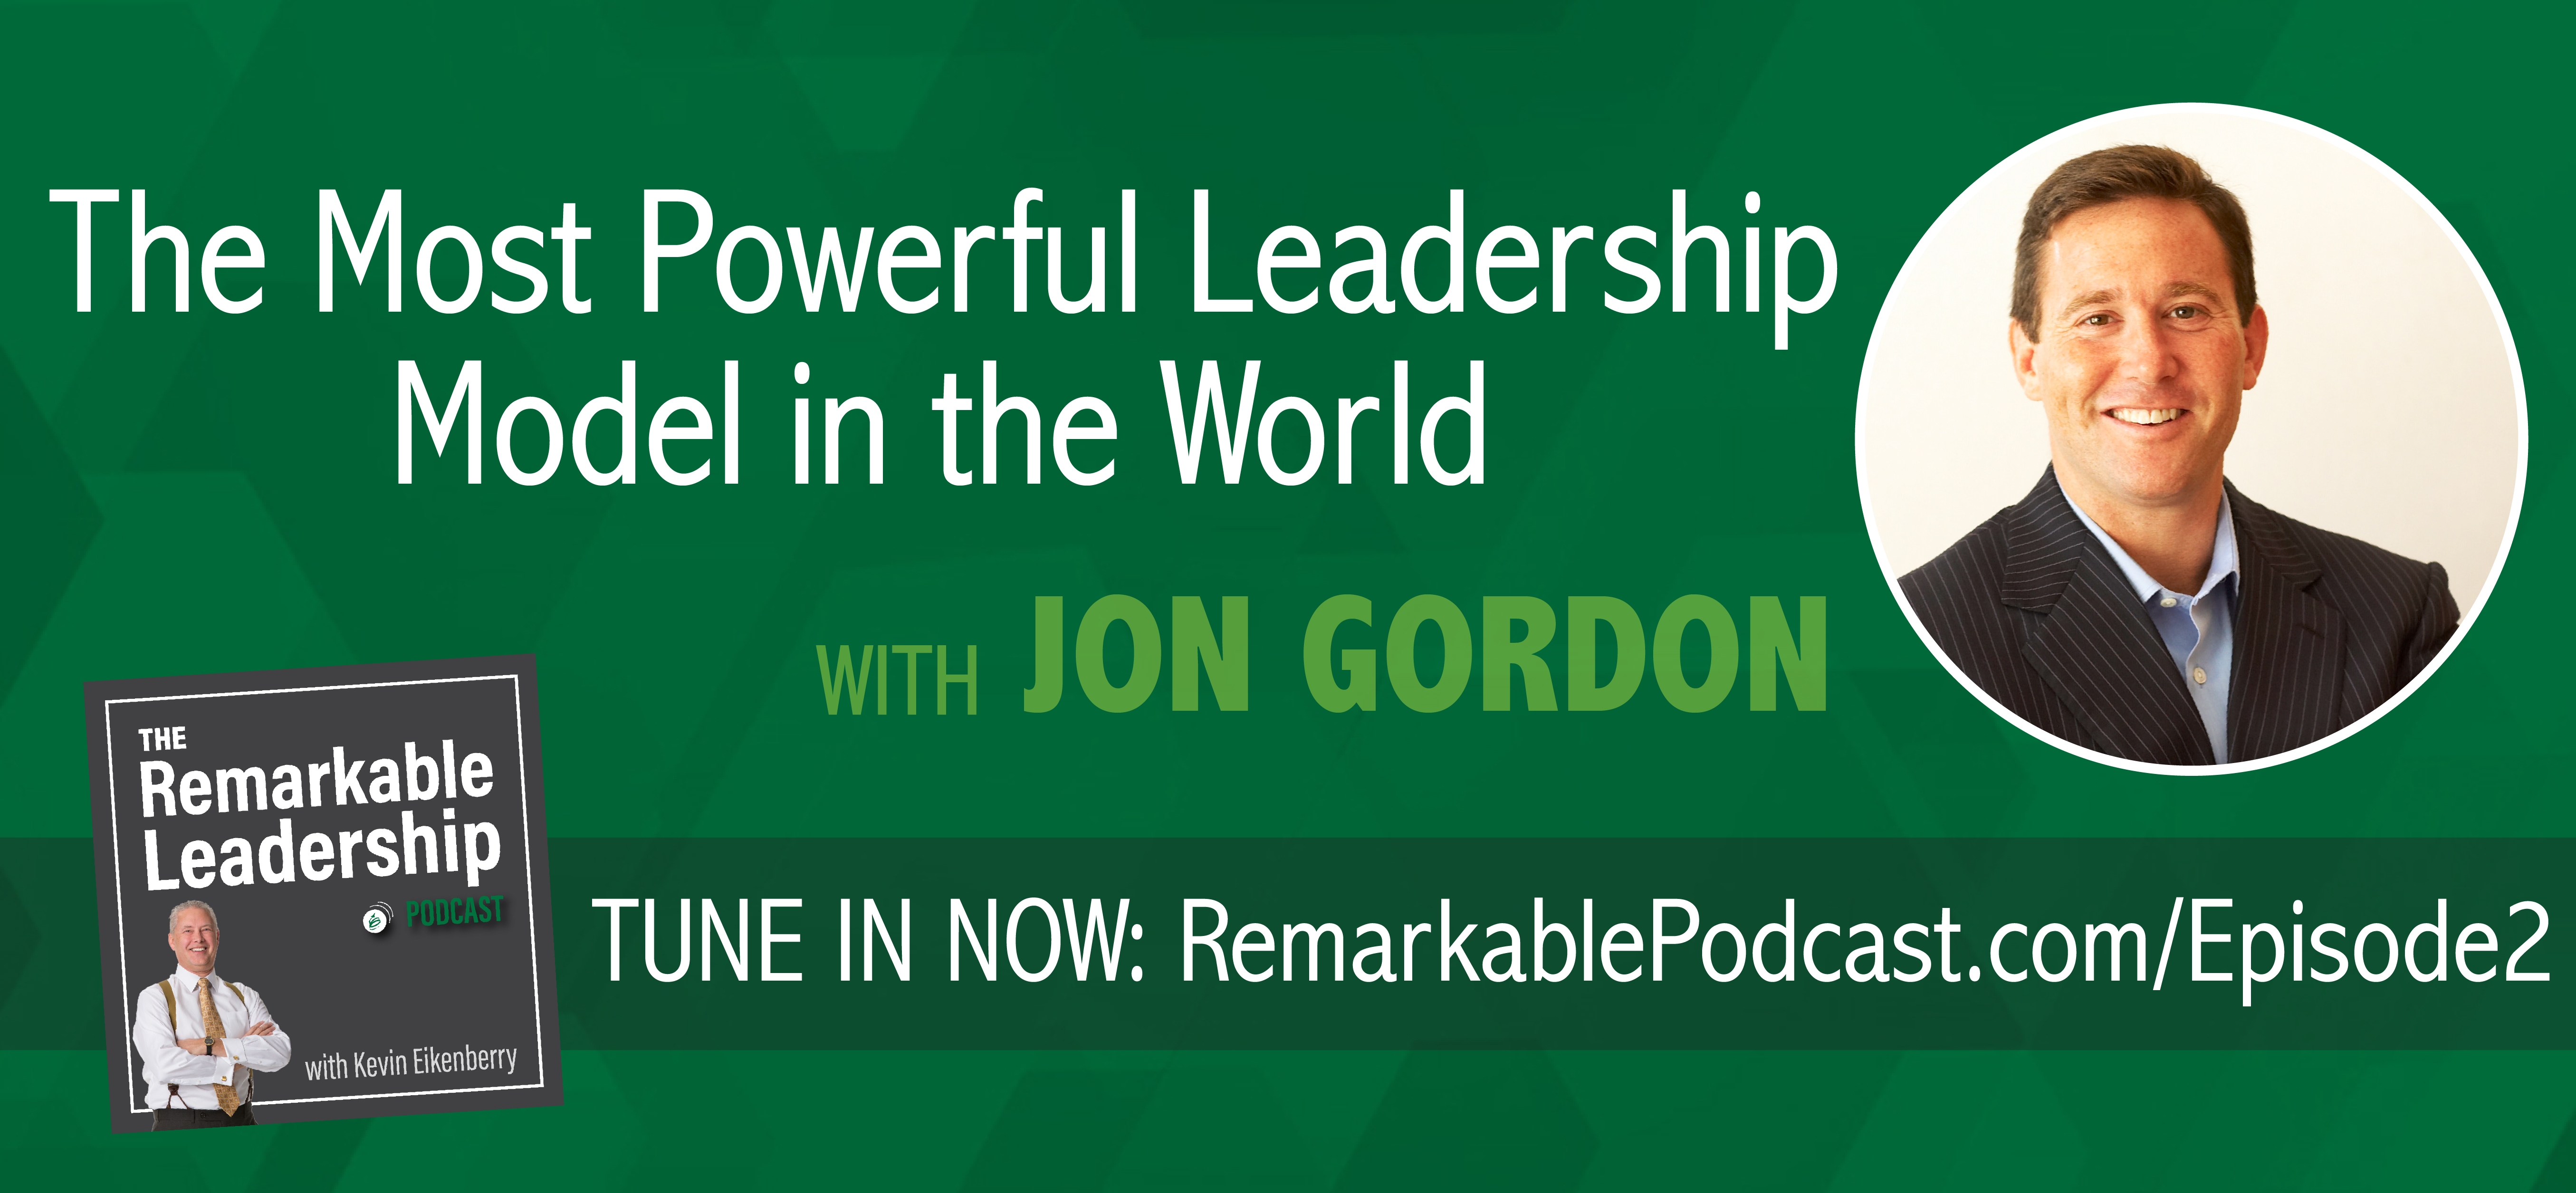 The Remarkable Leadership Podcast - Episode 2: The Most Powerful Leadership Model in the World with Jon Gordon